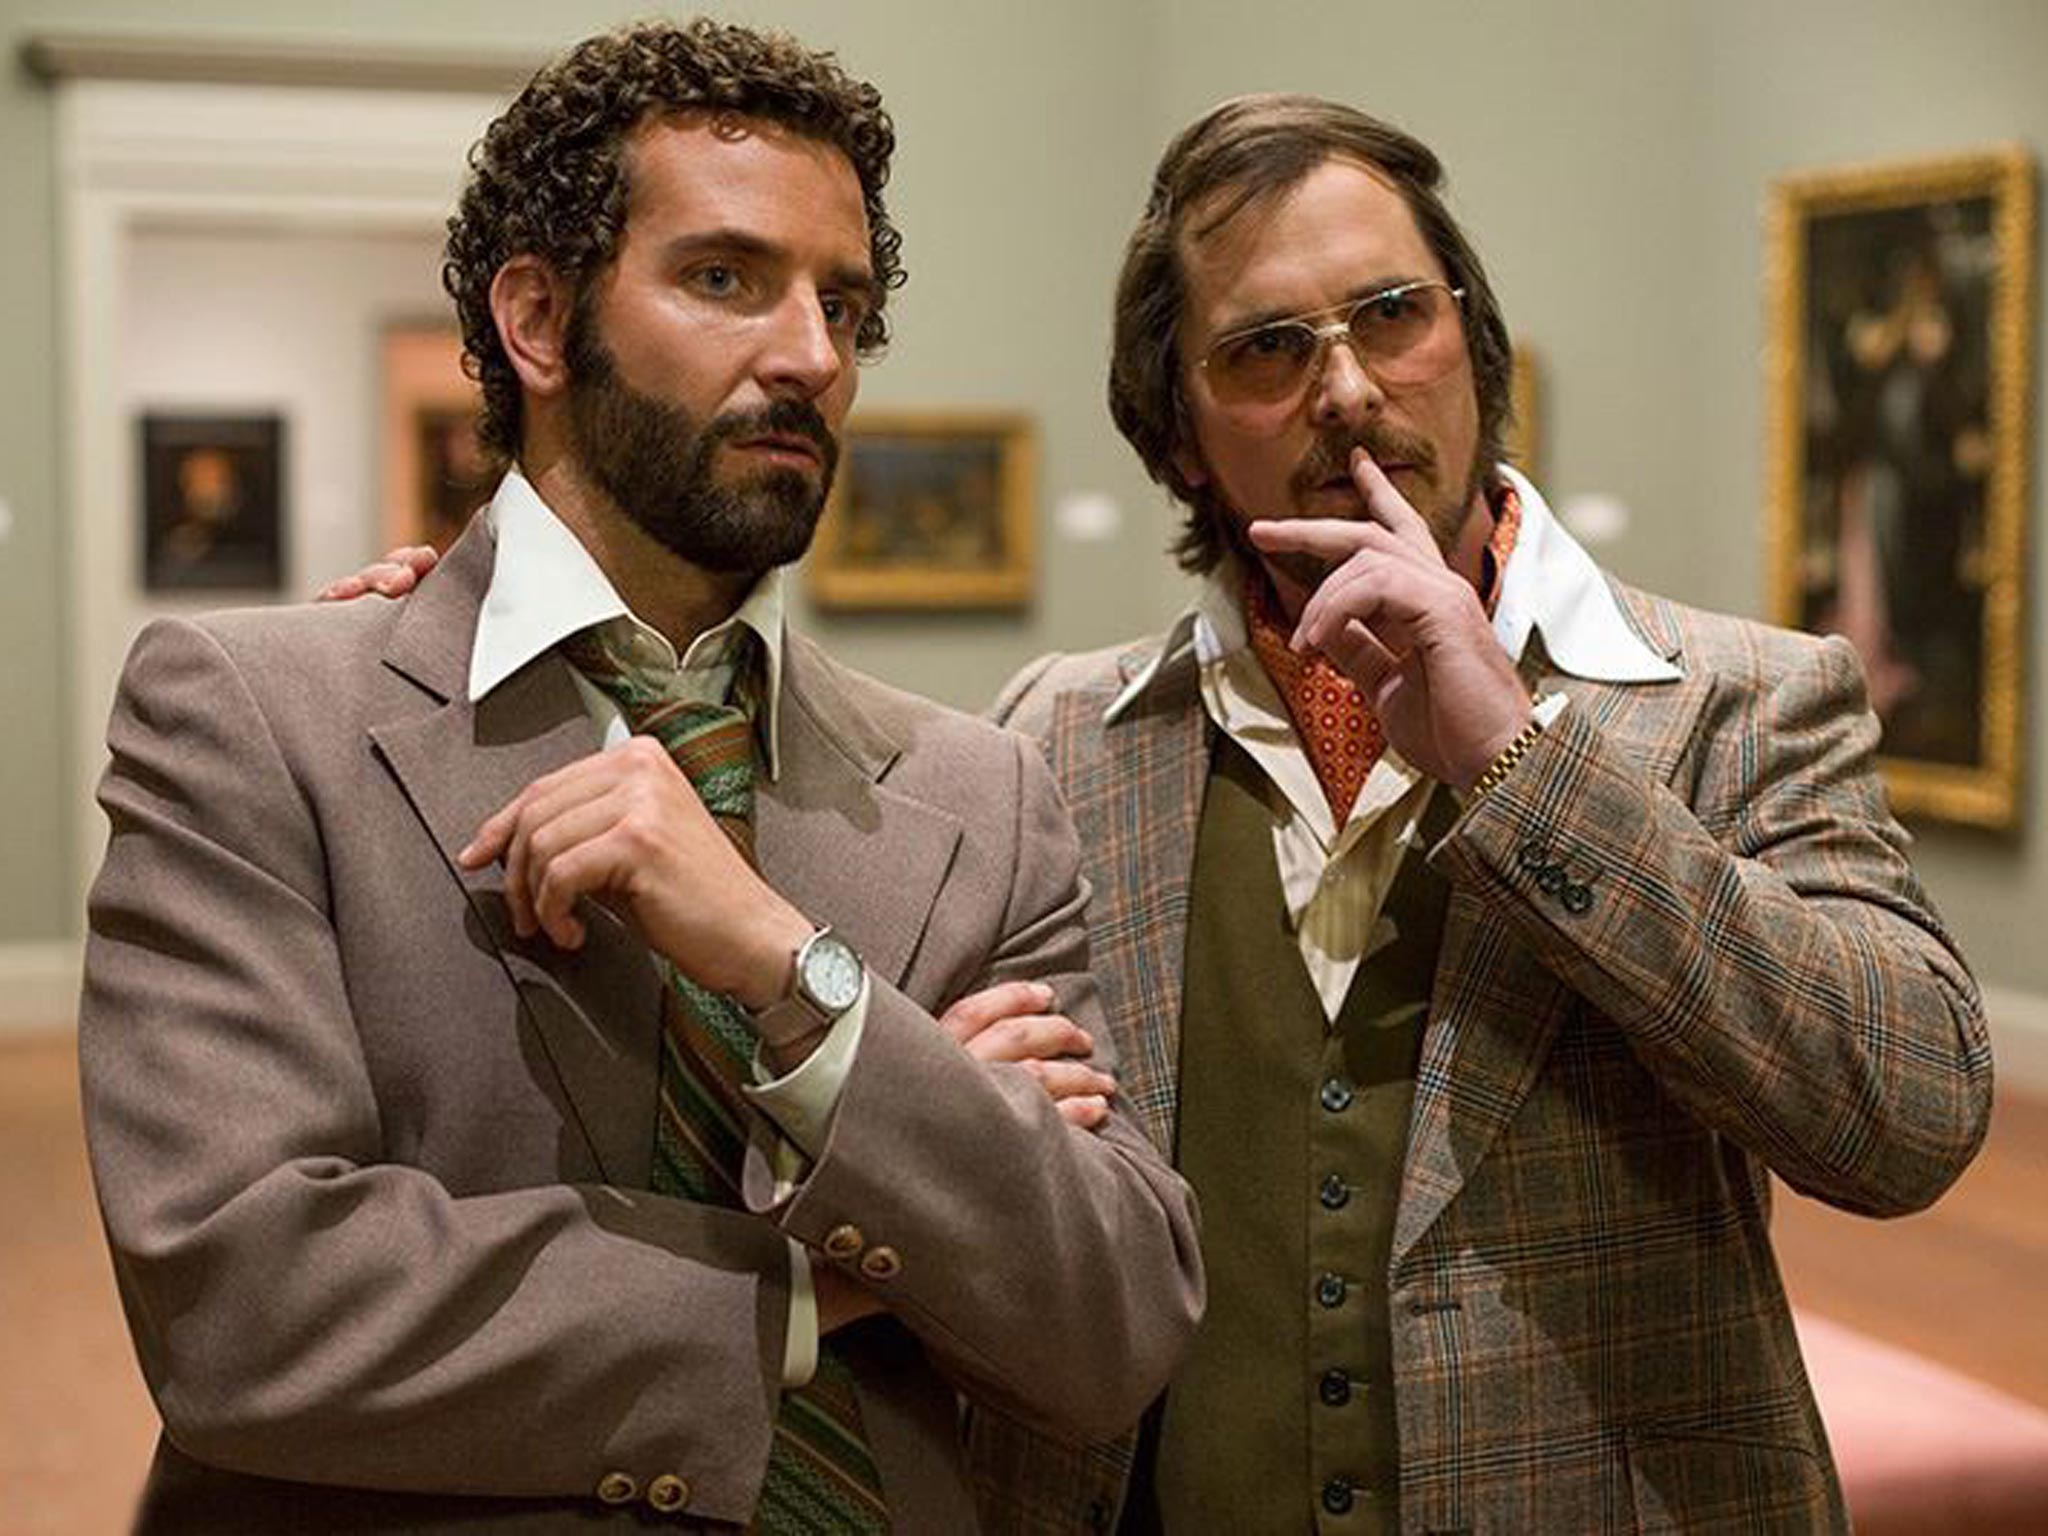 The film ‘American Hustle’ depicts a similar scheme